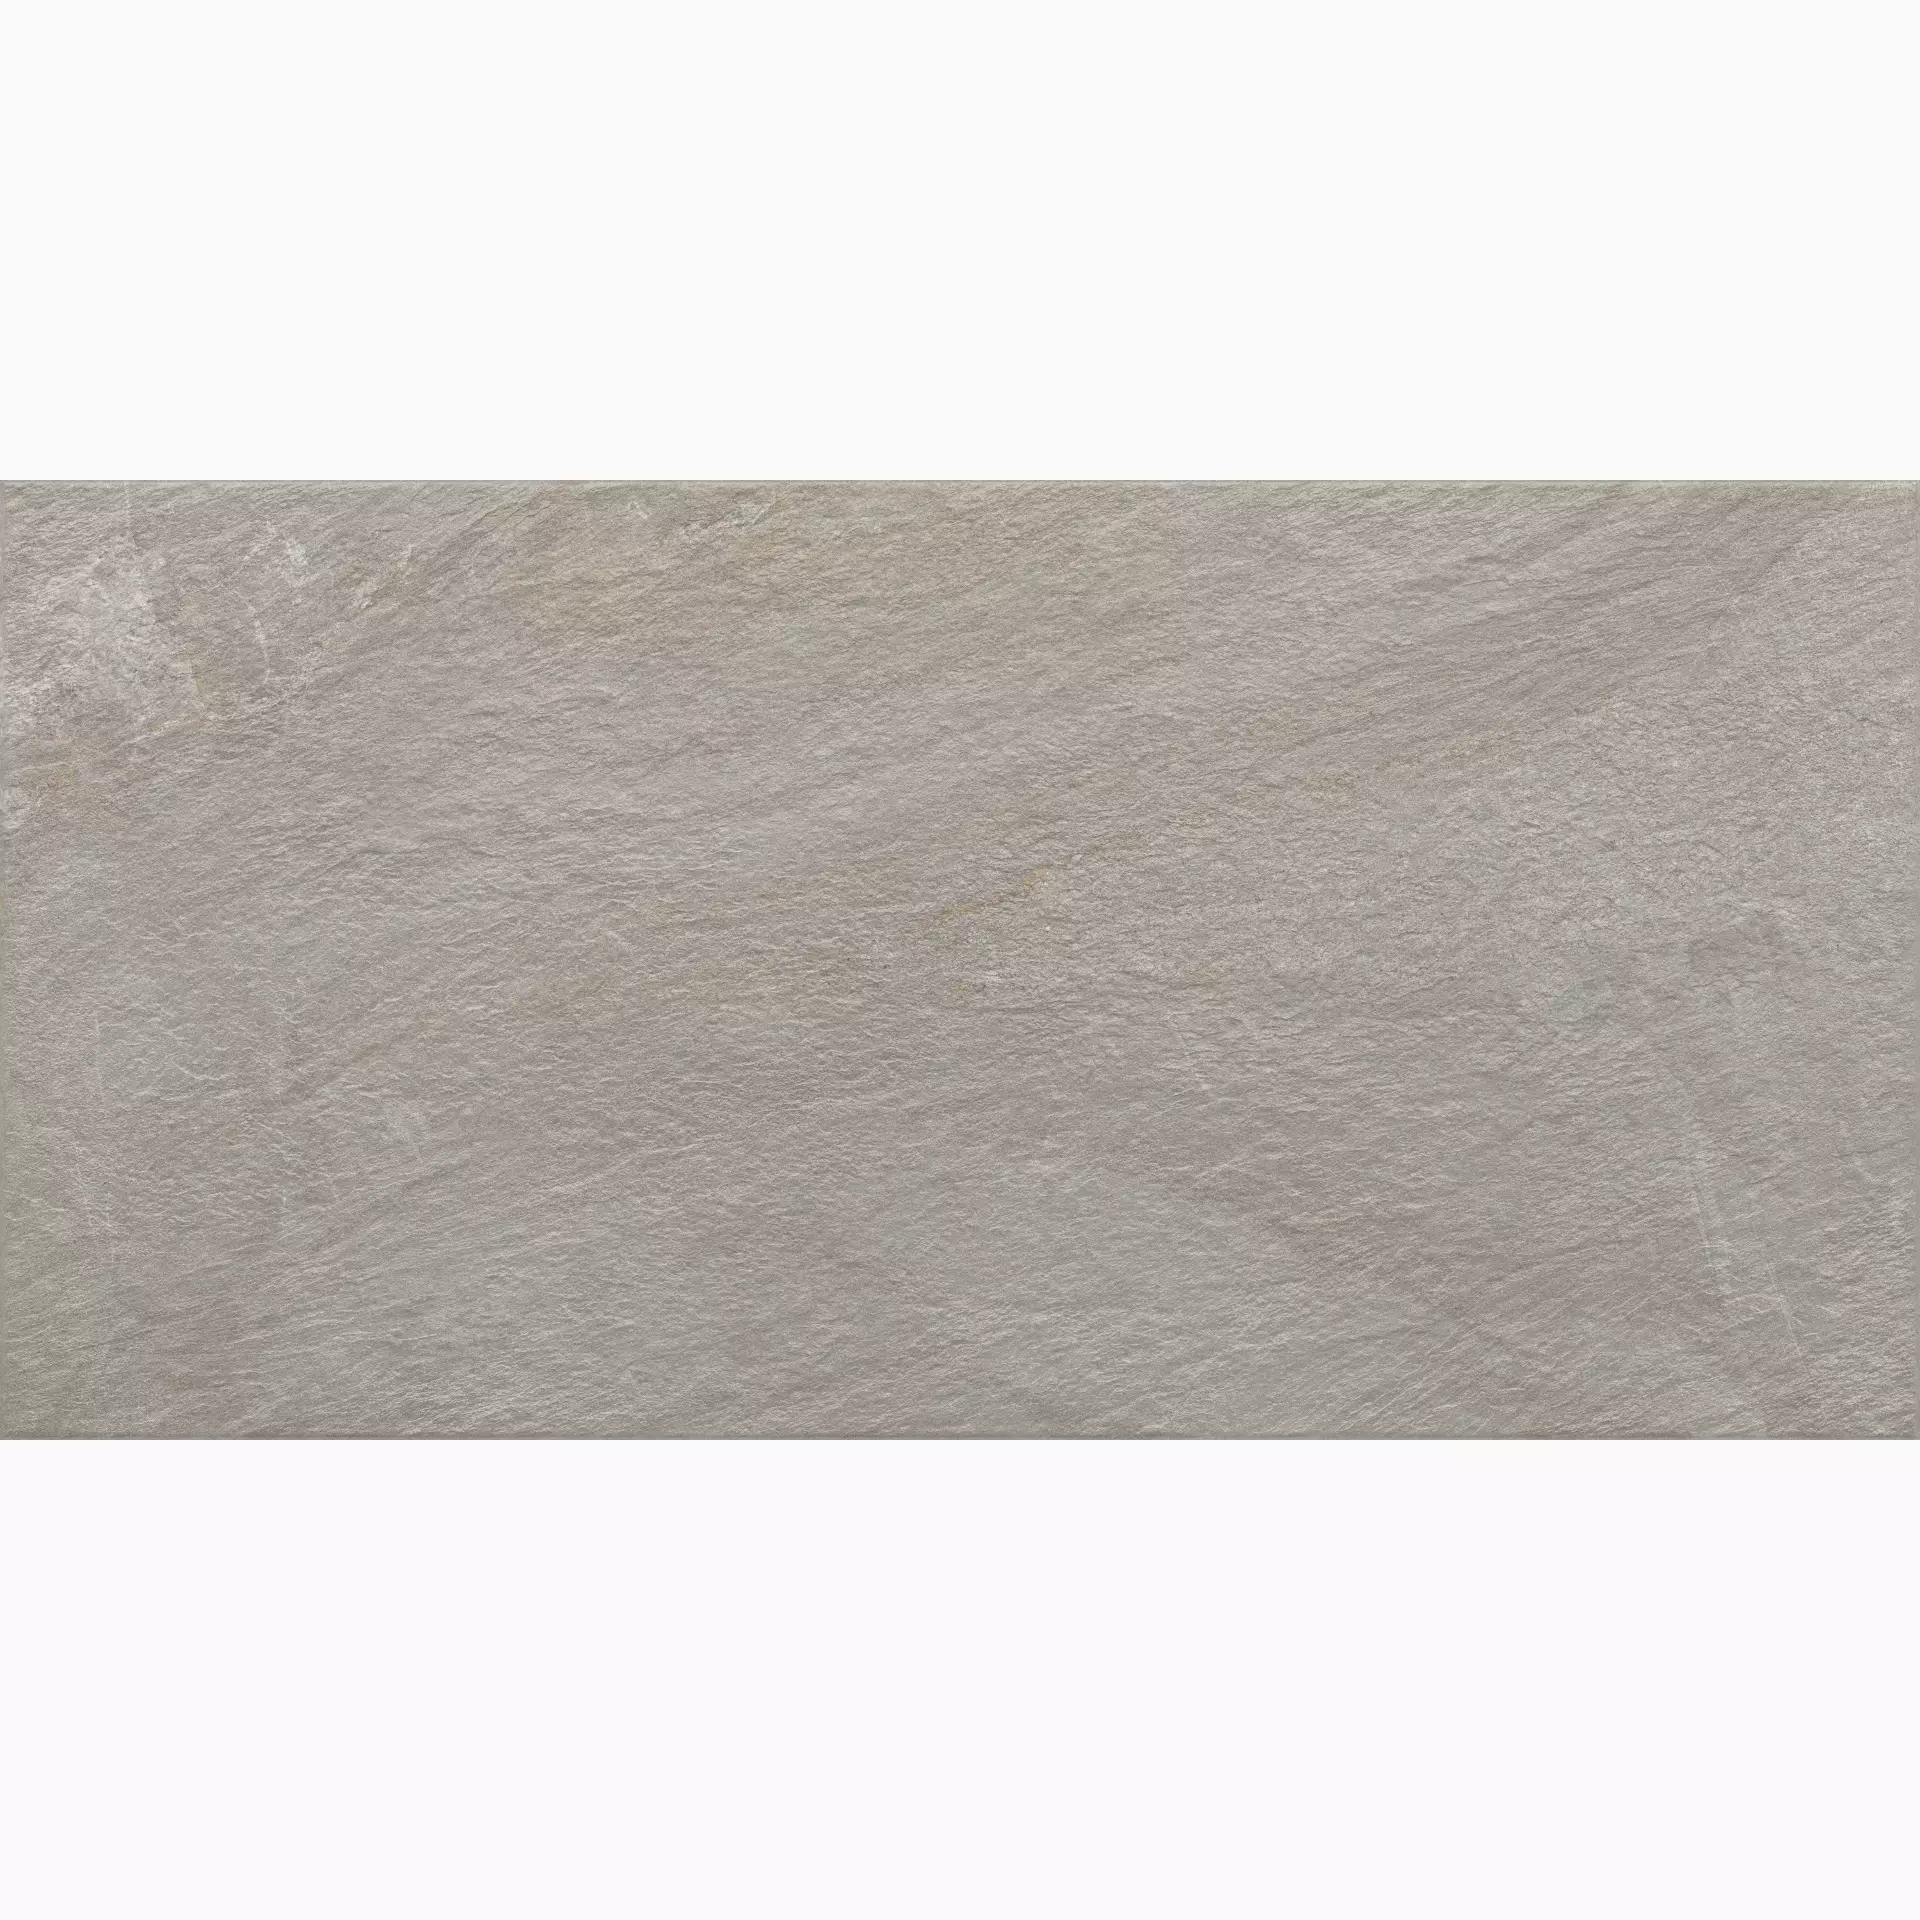 Panaria The Place District Smoke Antibacterial - Strutturato PGXP980 60x120cm rectified 20mm